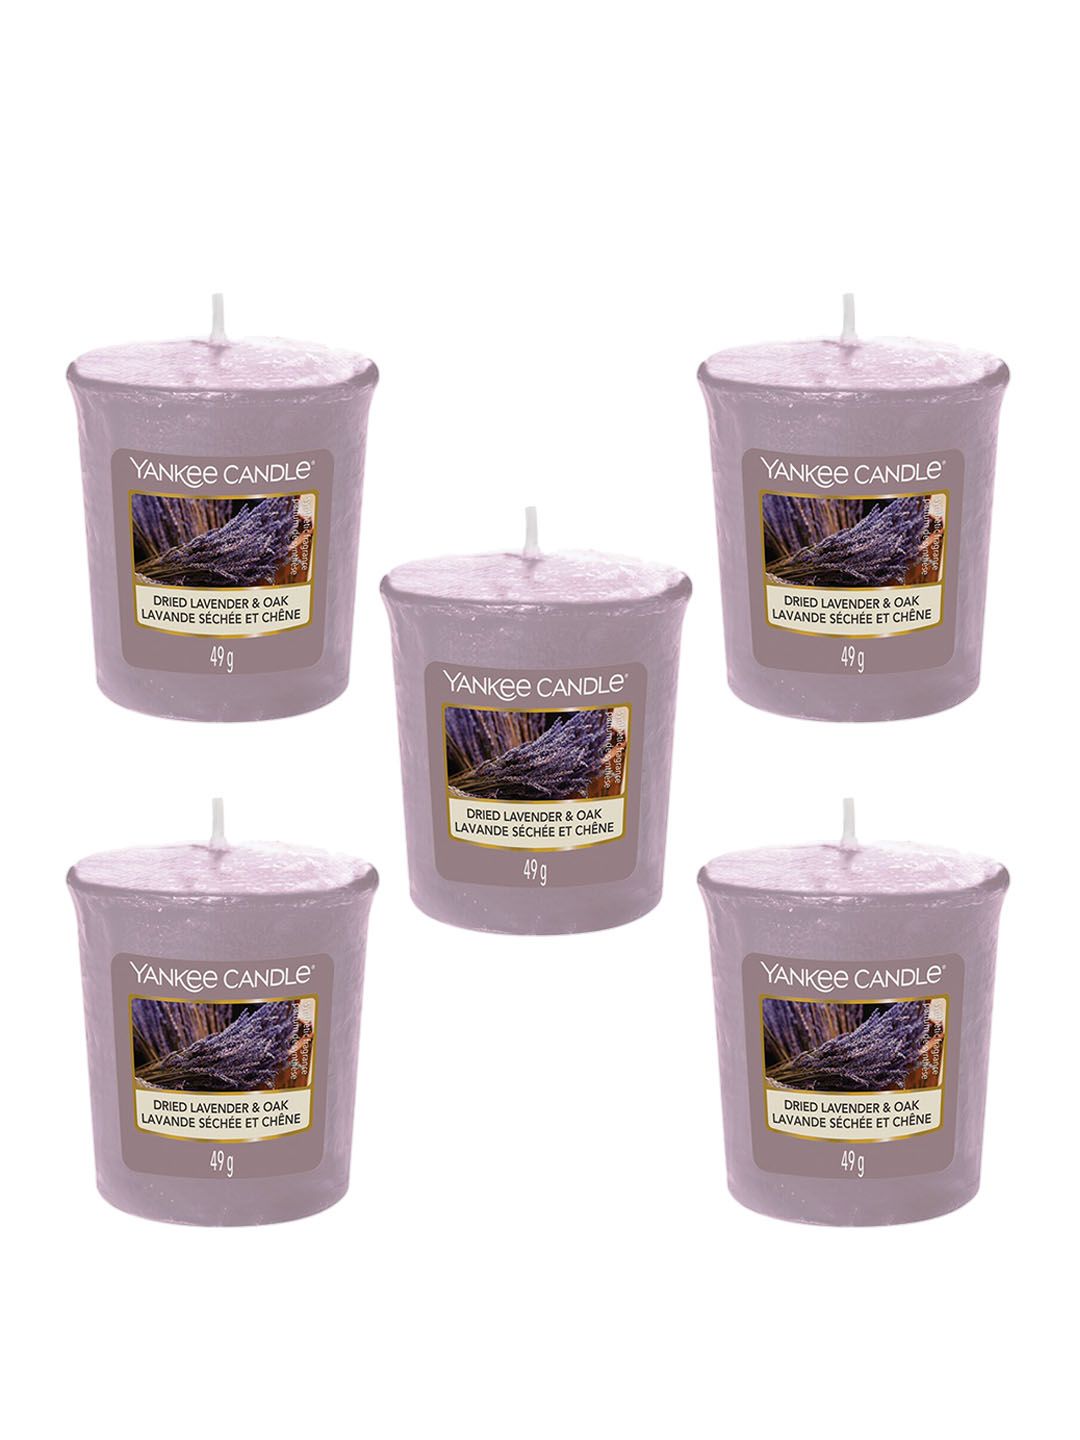 YANKEE CANDLE Set of 5 Classic Votive Dried Lavender & Oak Scented Candles Price in India